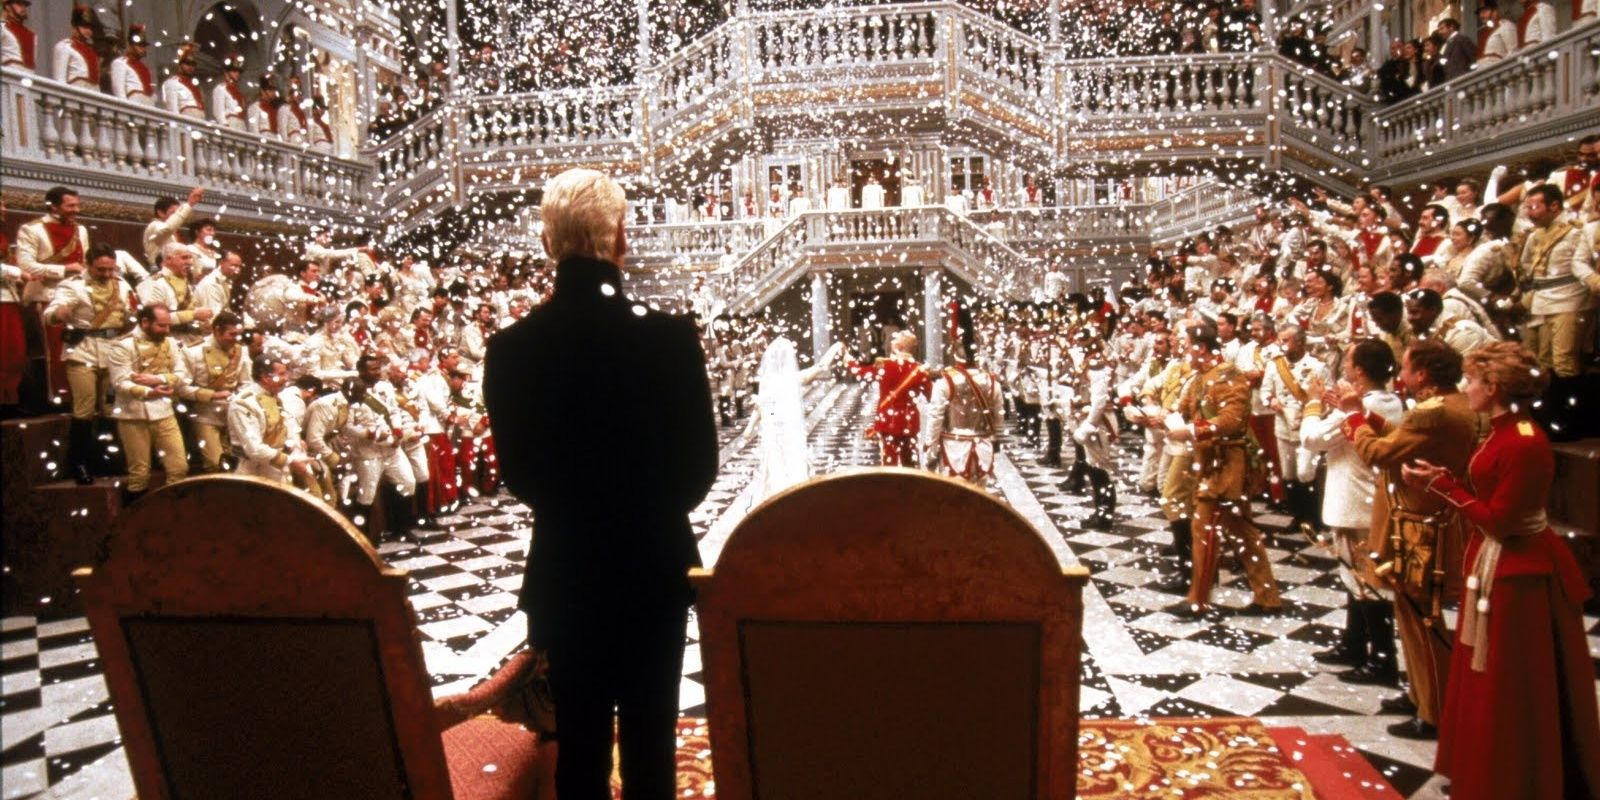 Kenneth Branagh stands and watches a celebration in Hamlet (1996)